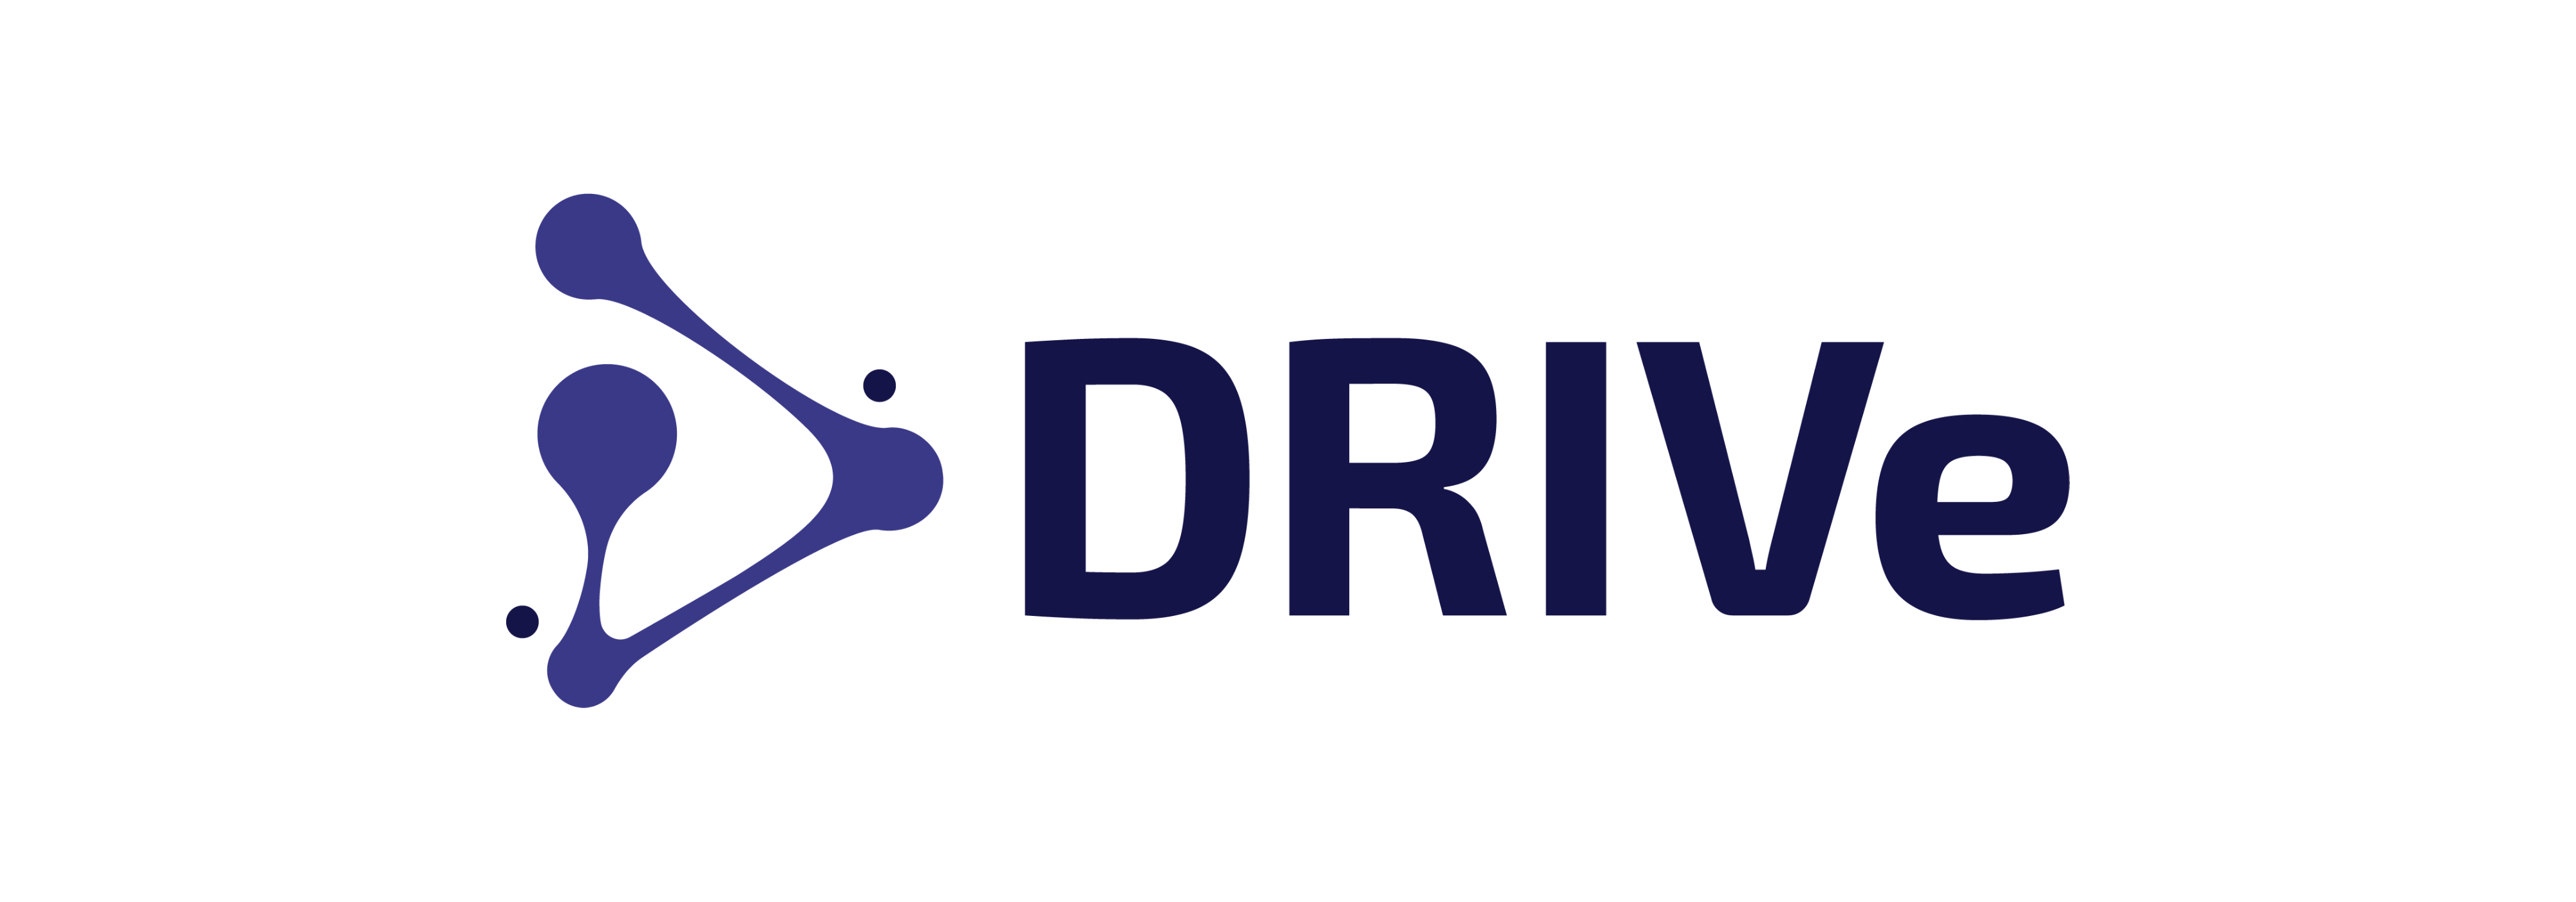 DRIVe - Transforming Health Security